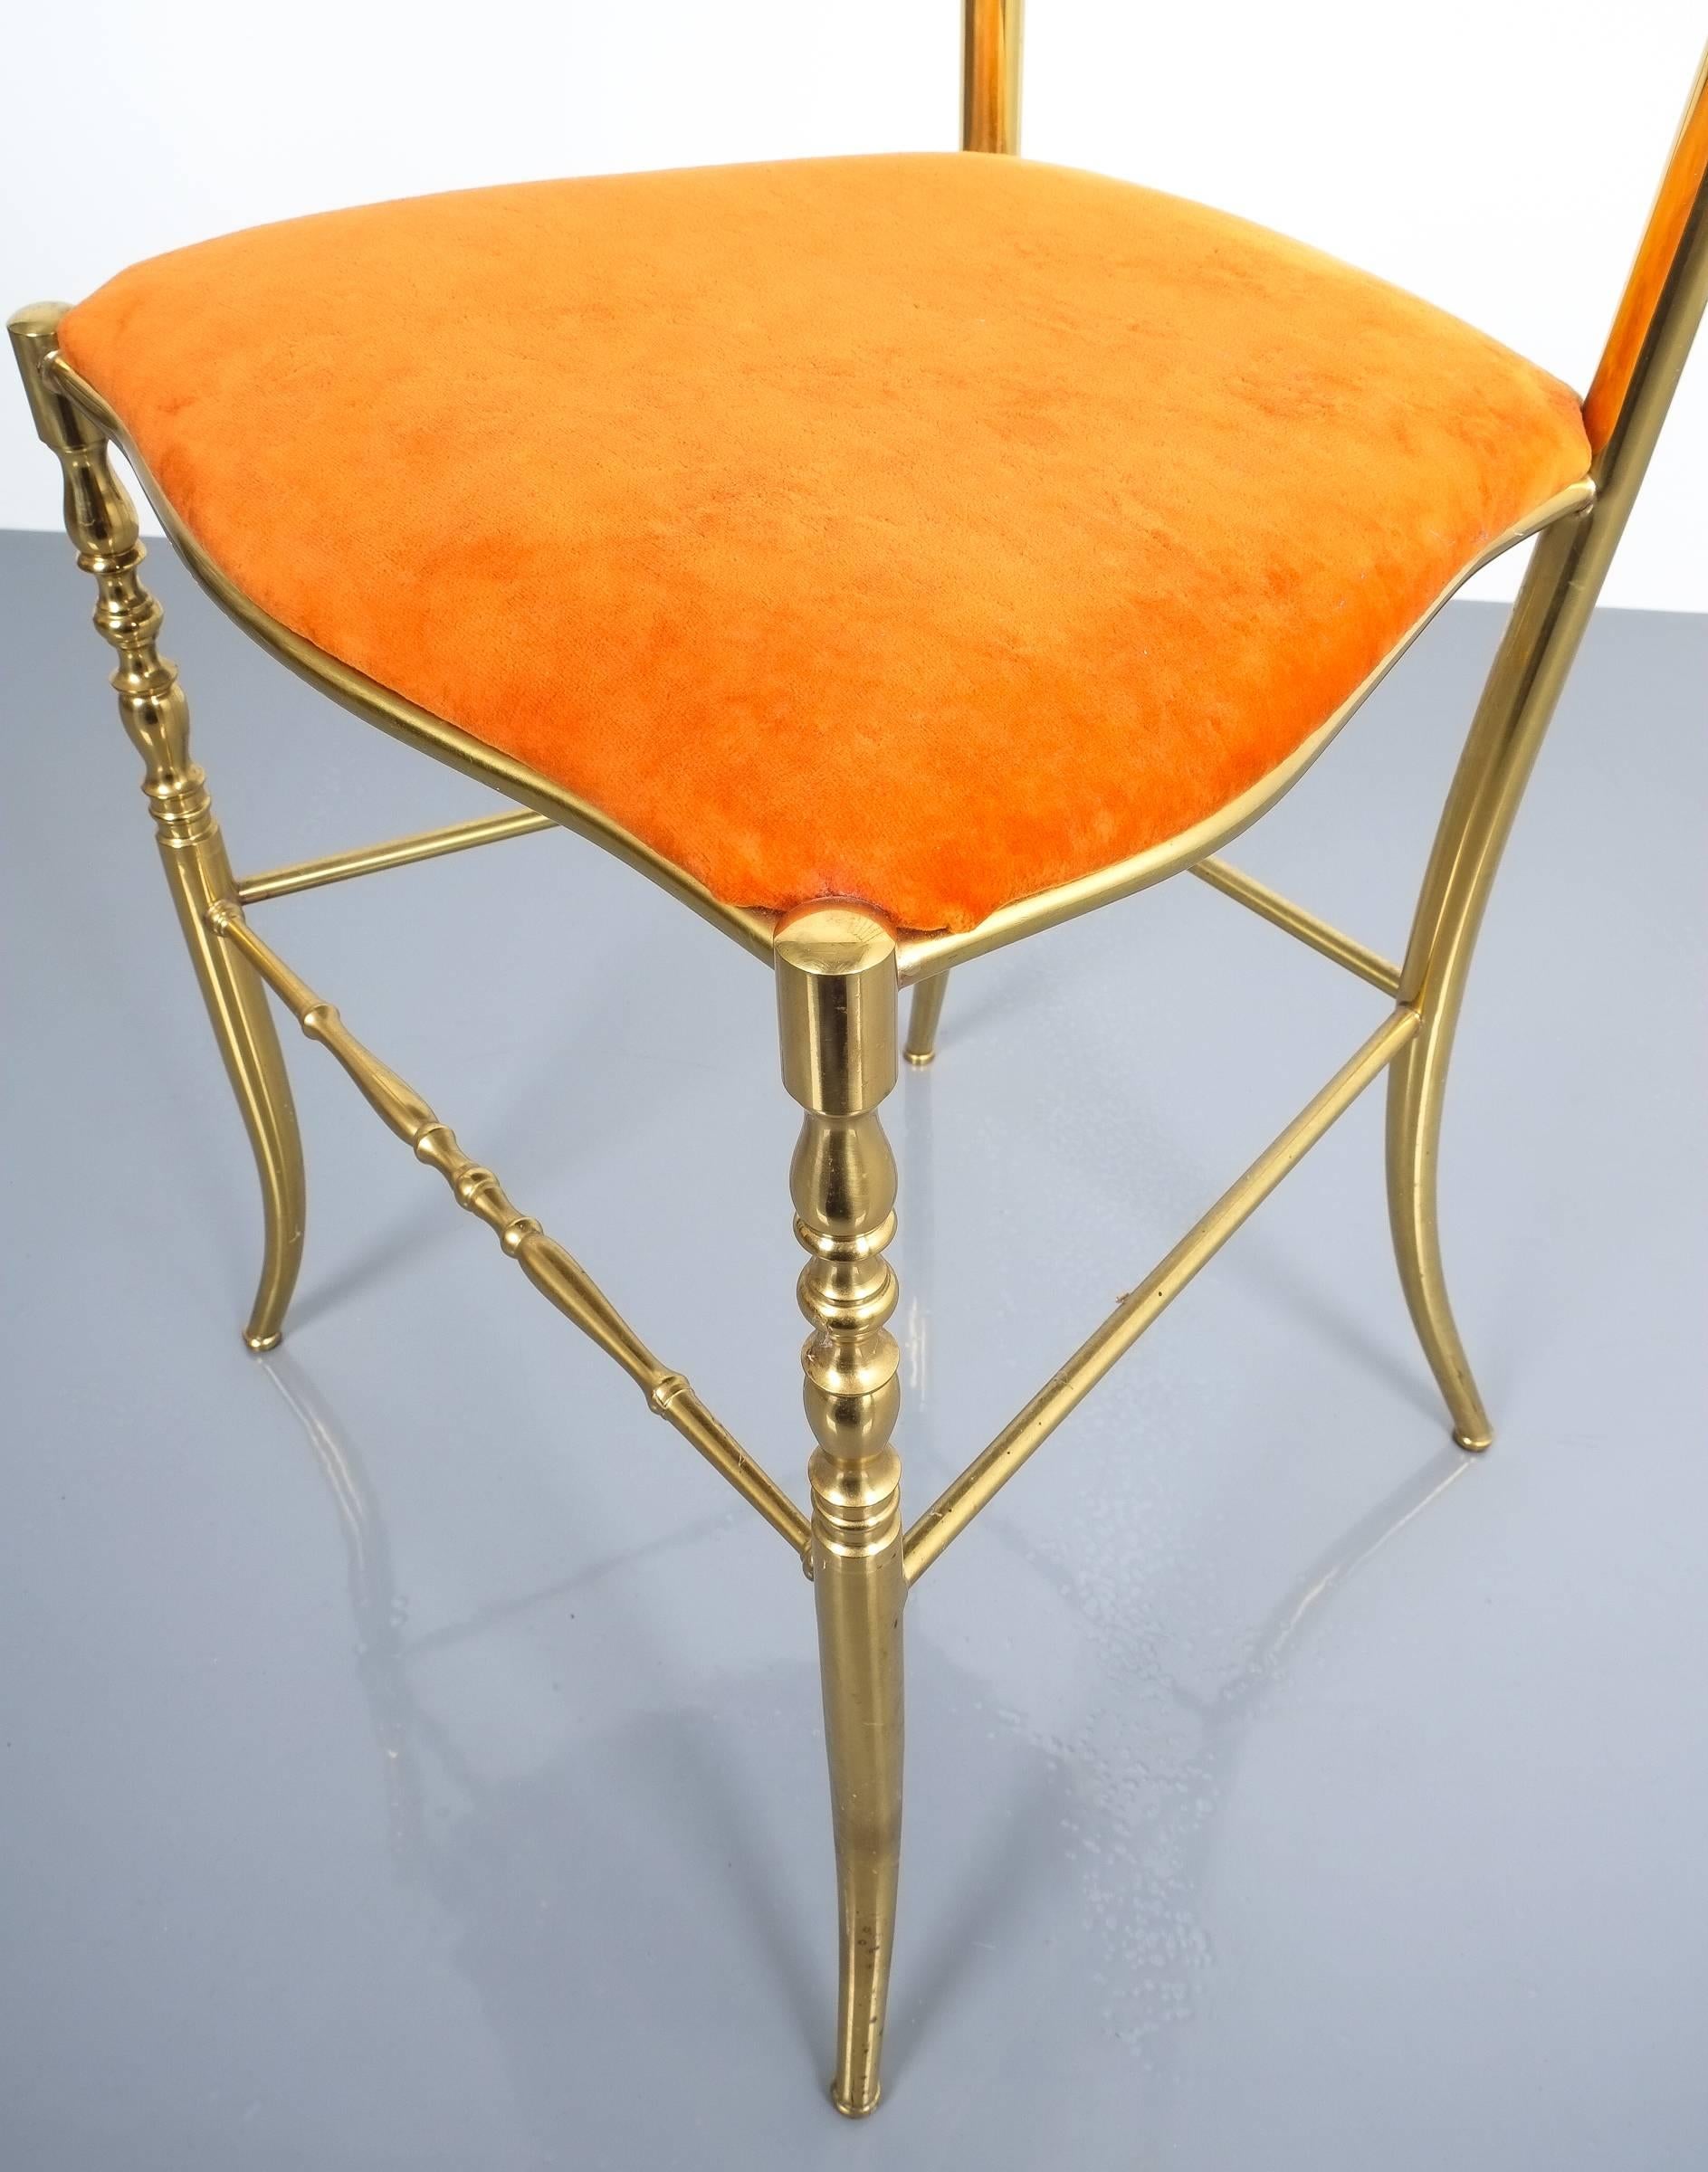 Velvet Pair of Polished High Back Brass Chairs by Chiavari, Italy, 1950